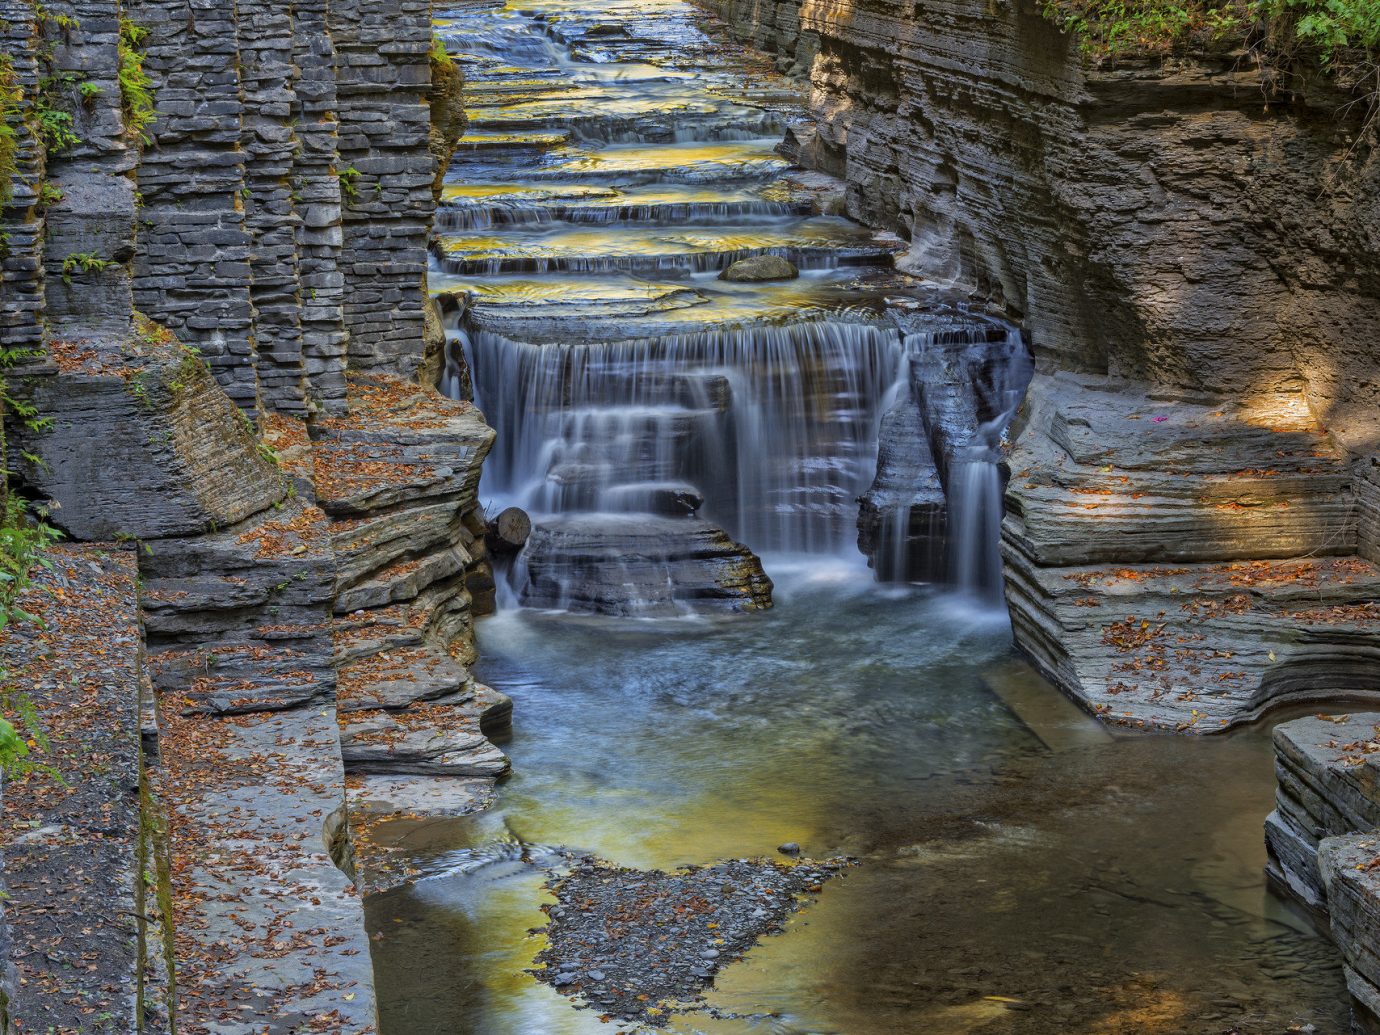 Trip Ideas Nature Waterfall water outdoor rock wall Ruins reflection water feature autumn ancient history terrain cliff stream geology stone